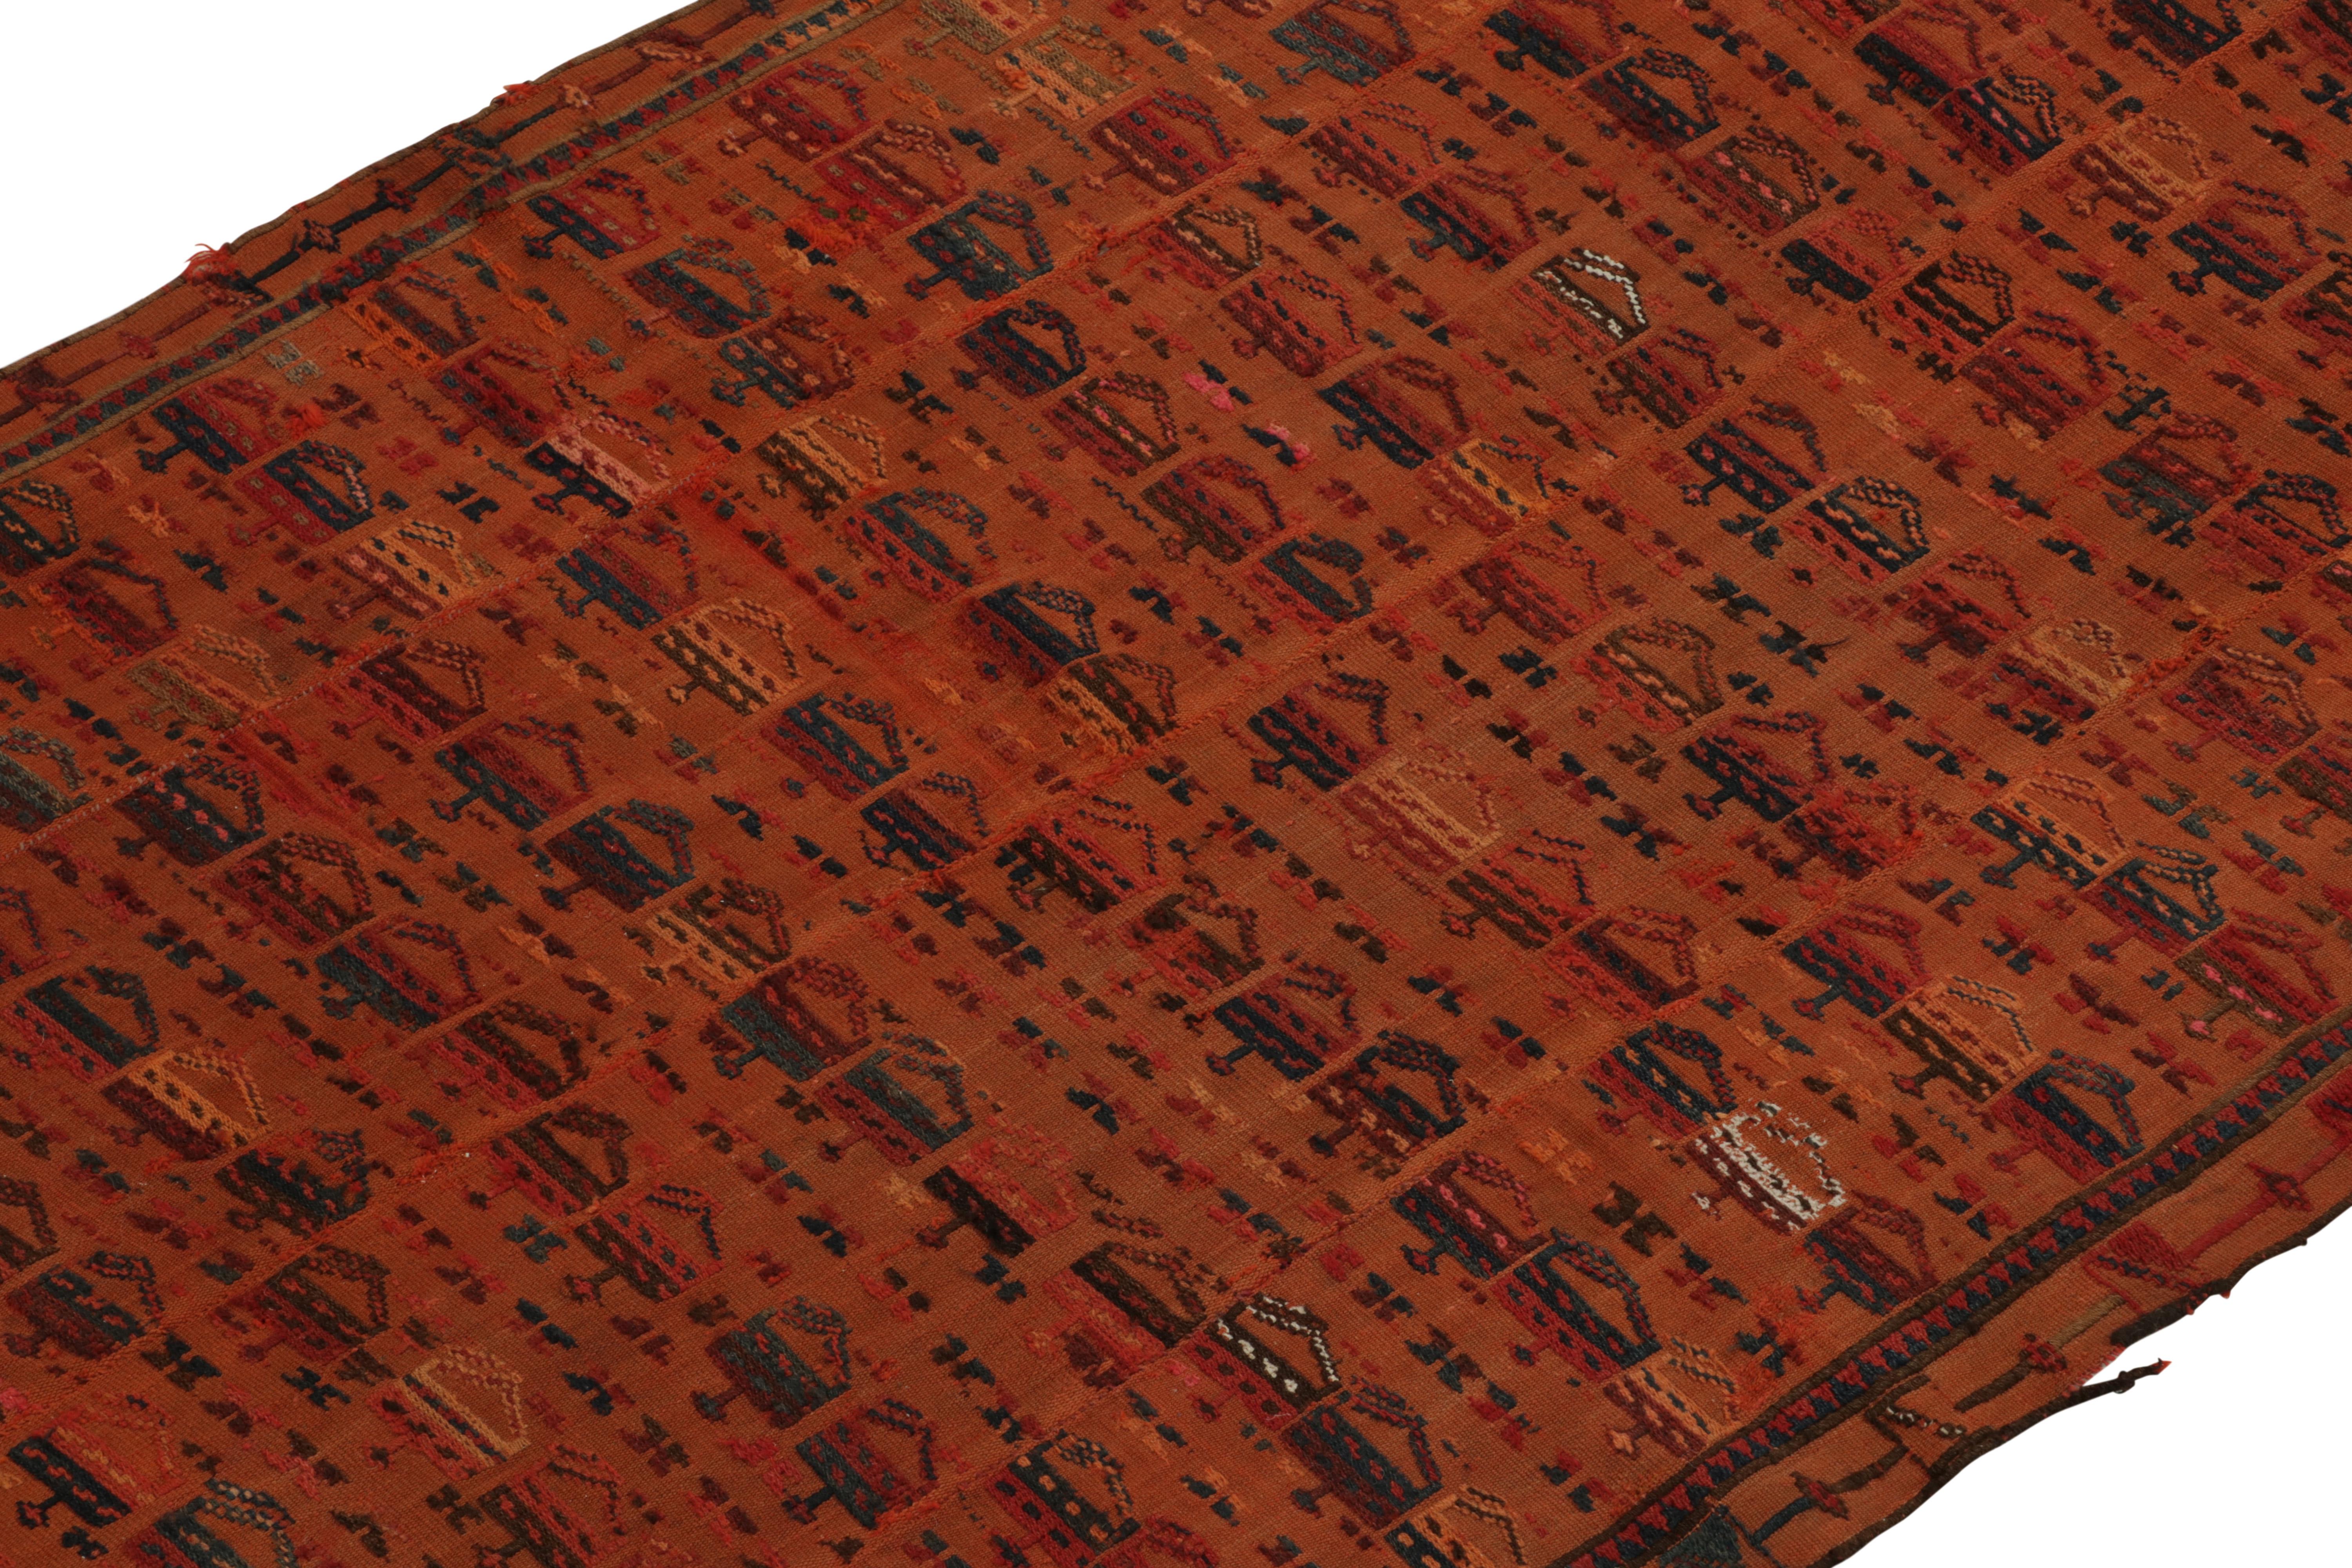 Tribal Antique Verneh Kilim in Orange, Blue and Red Geometric patterns by Rug & Kilim For Sale